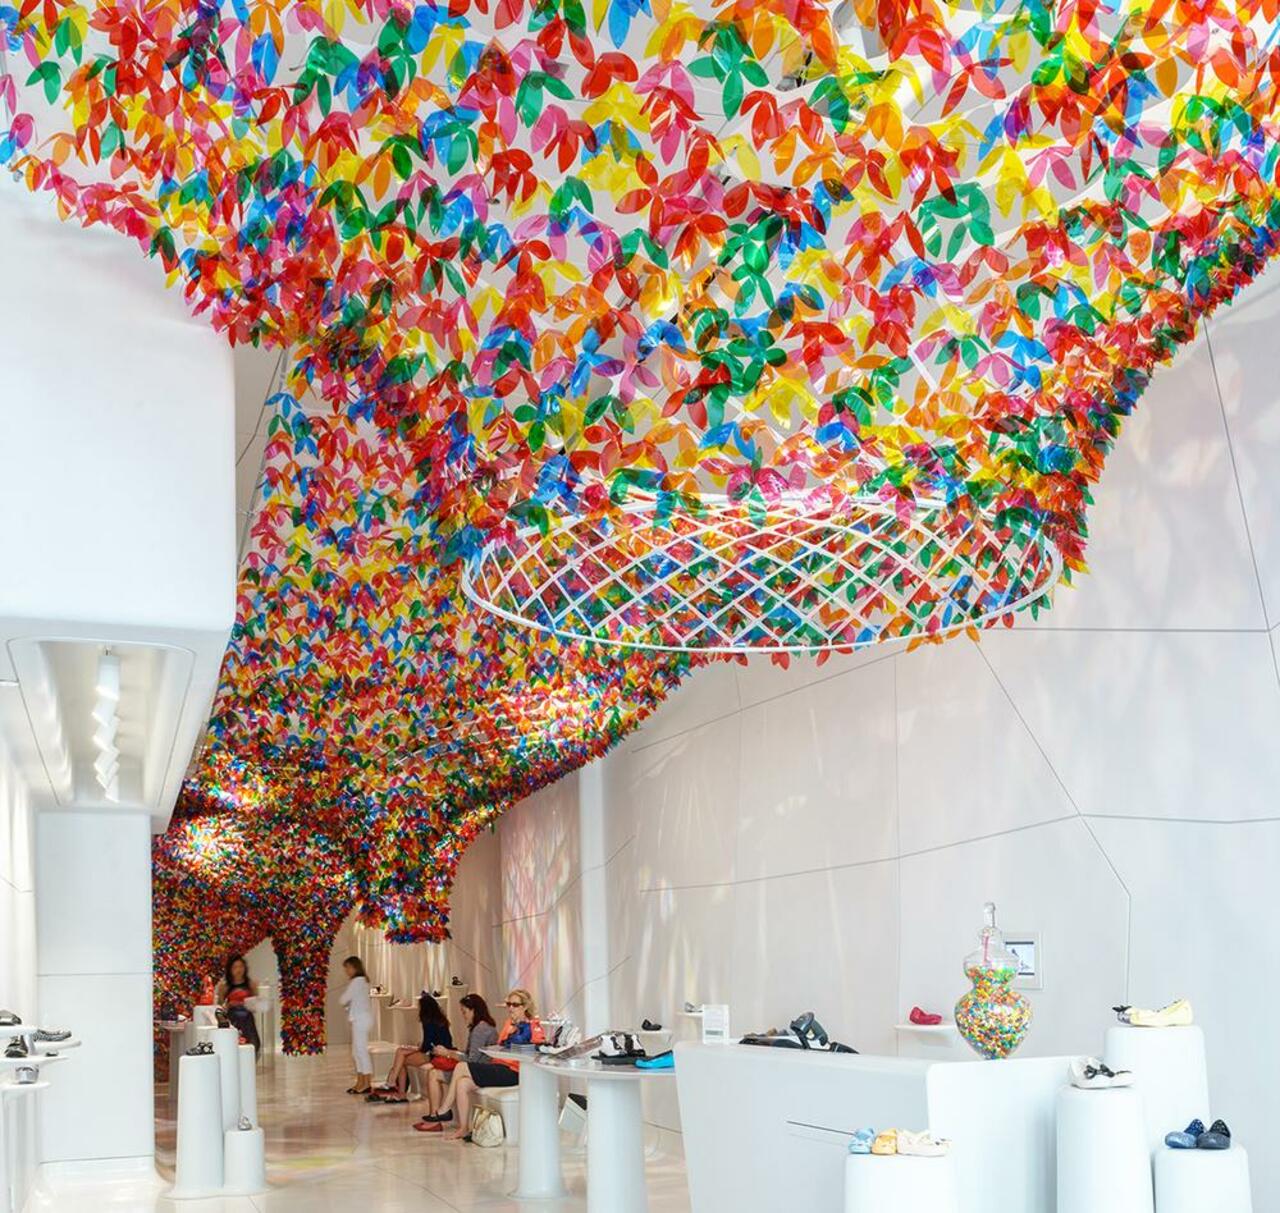 We Are Flowers Installation at Melissa 
By Softlab NYC
#Art #Installation http://t.co/1hqWNDb6bg